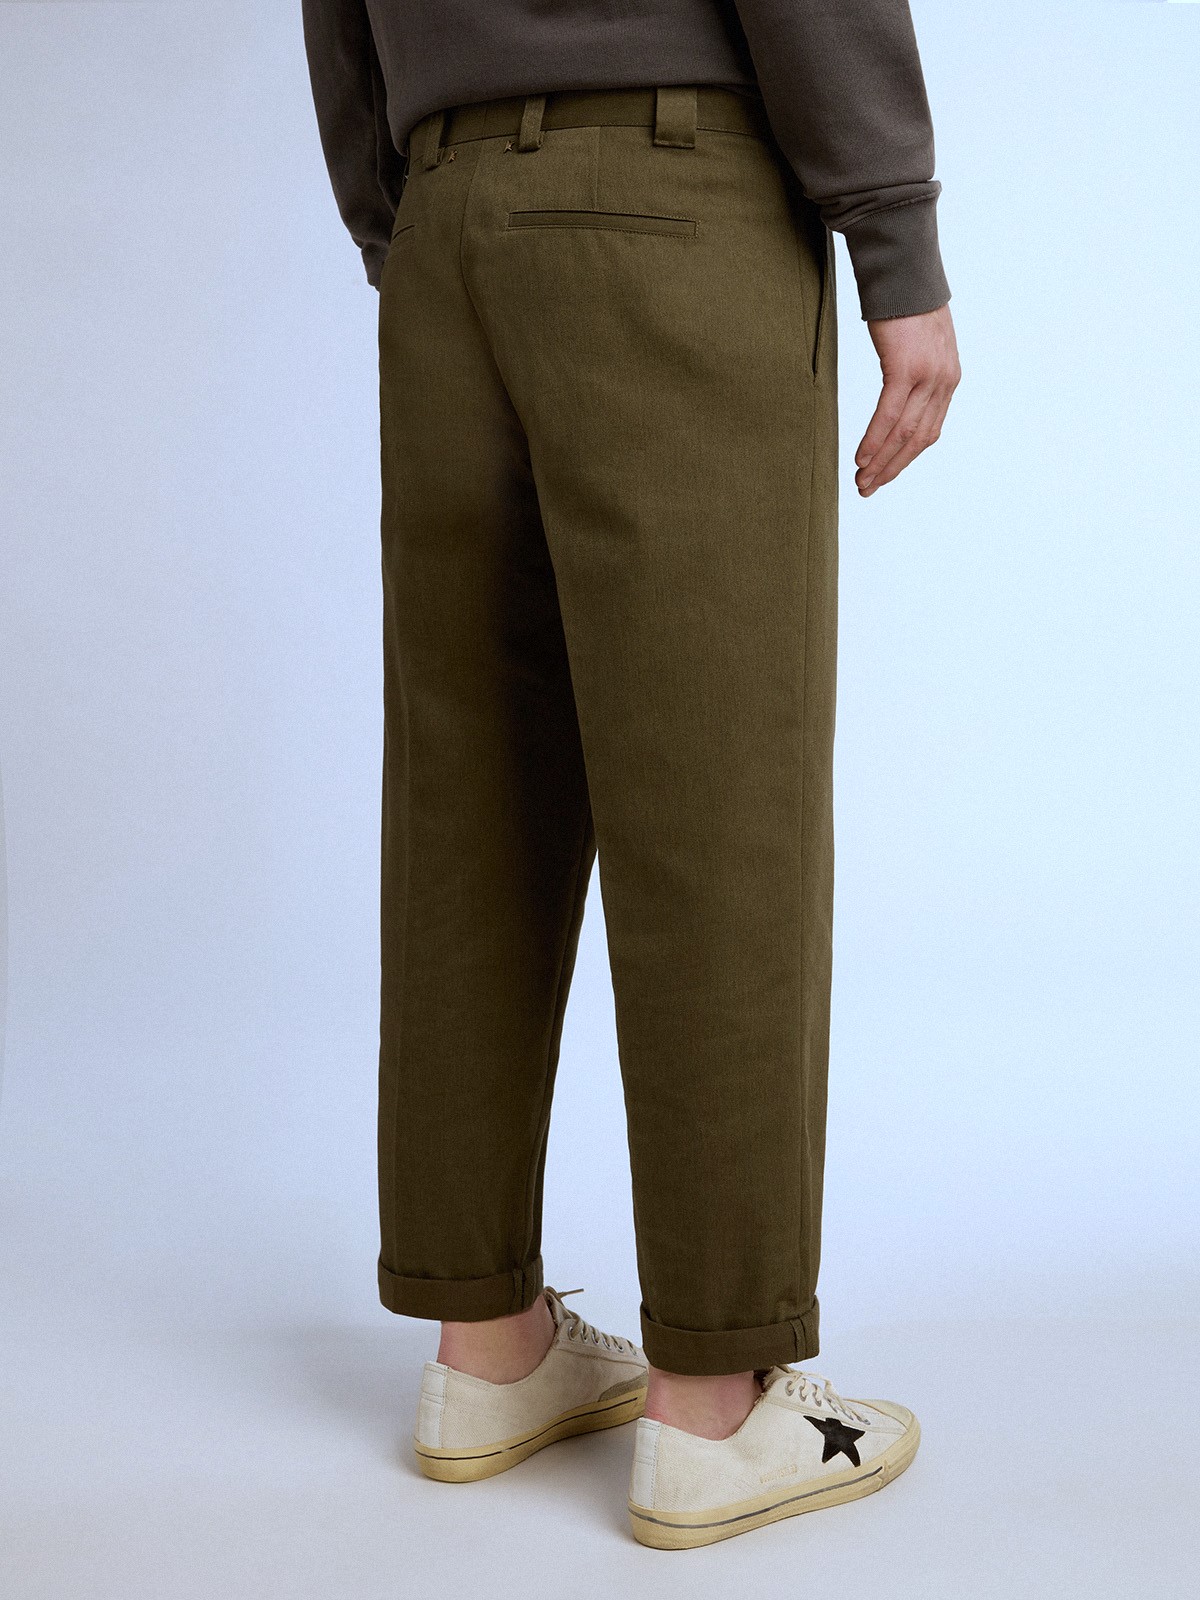 GOLDEN GOOSE Chino Skate Pants in Olive